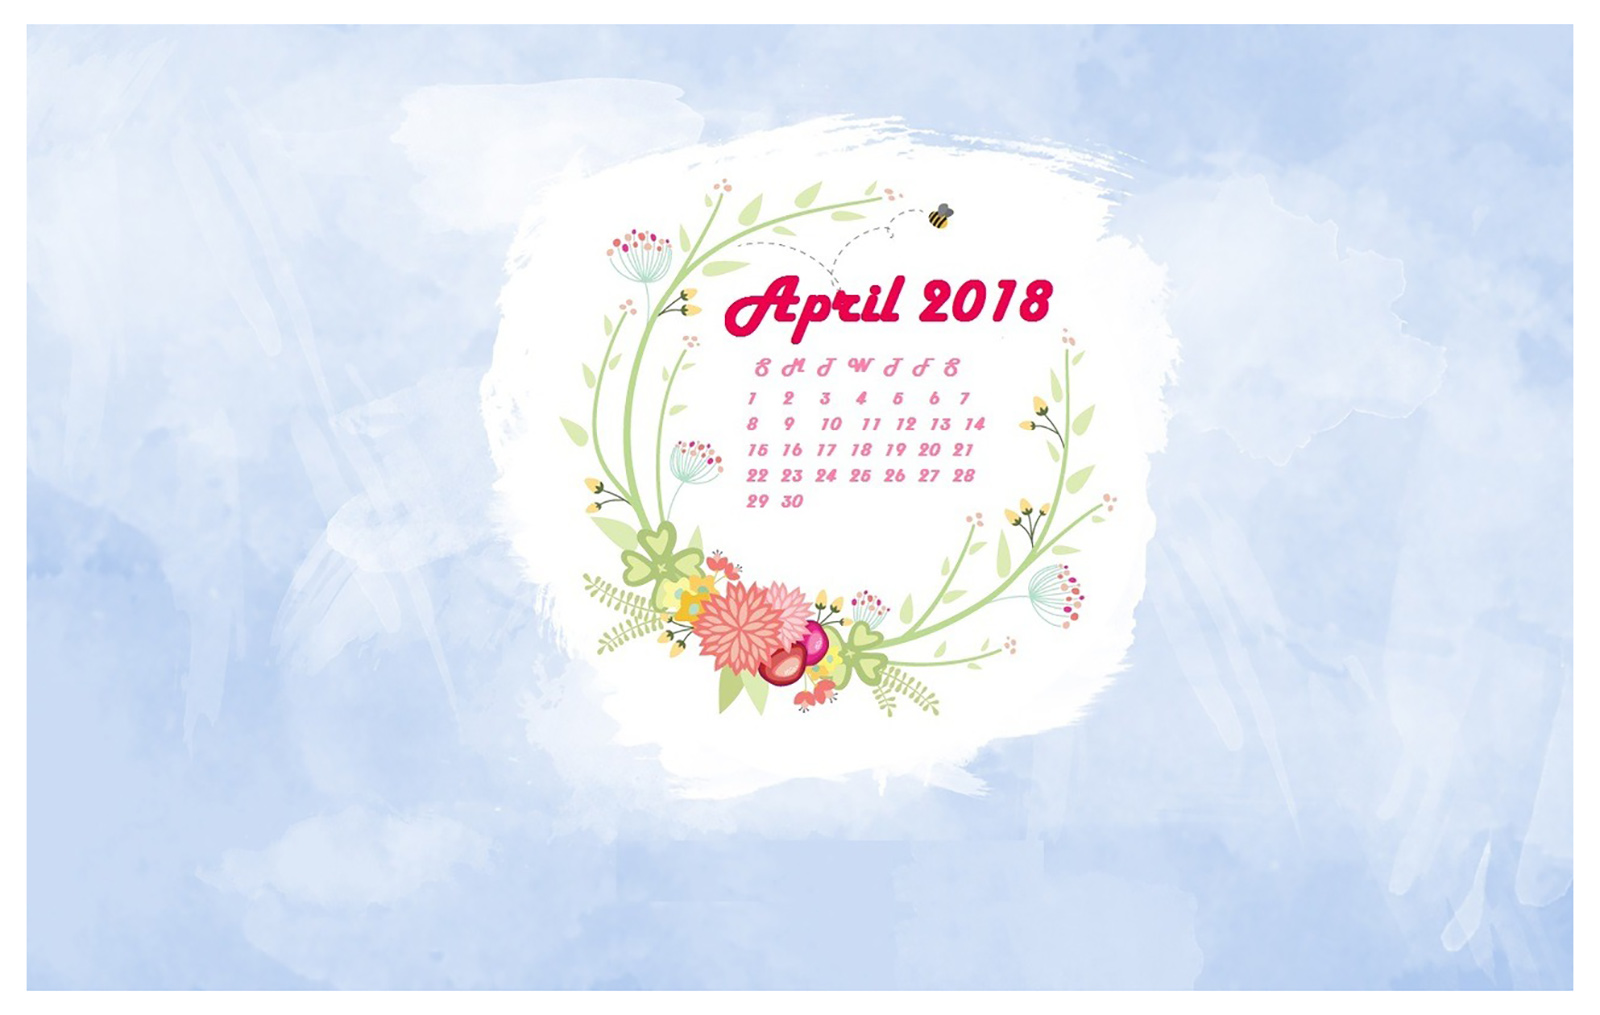 Wallpaper with April 2018 Calendar for PC iPad and SmartPhone 1600x1015